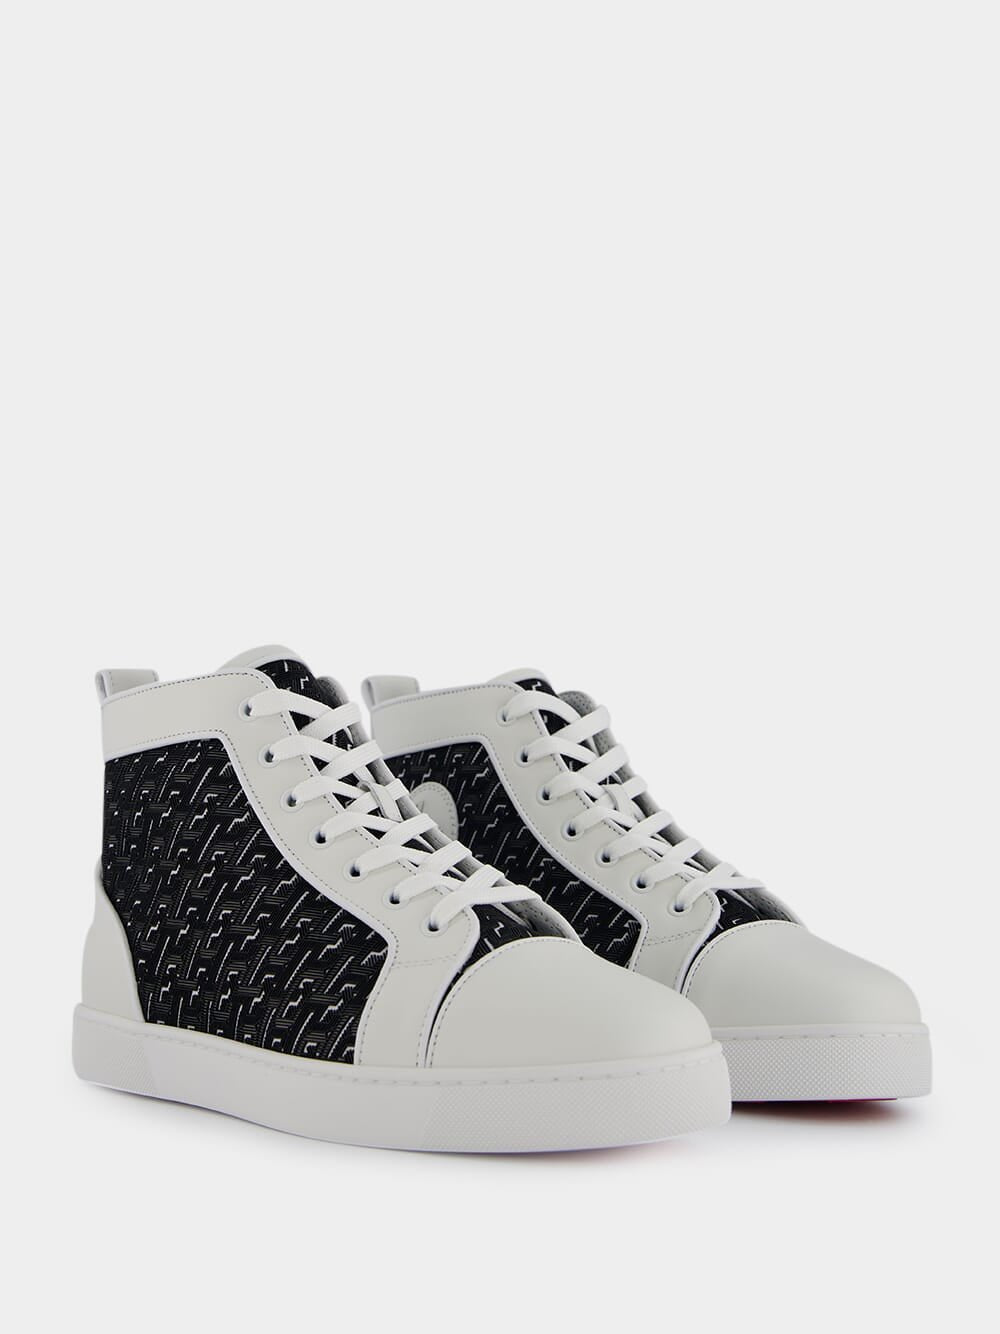 Christian LouboutinLouis High-Top Sneaker at Fashion Clinic